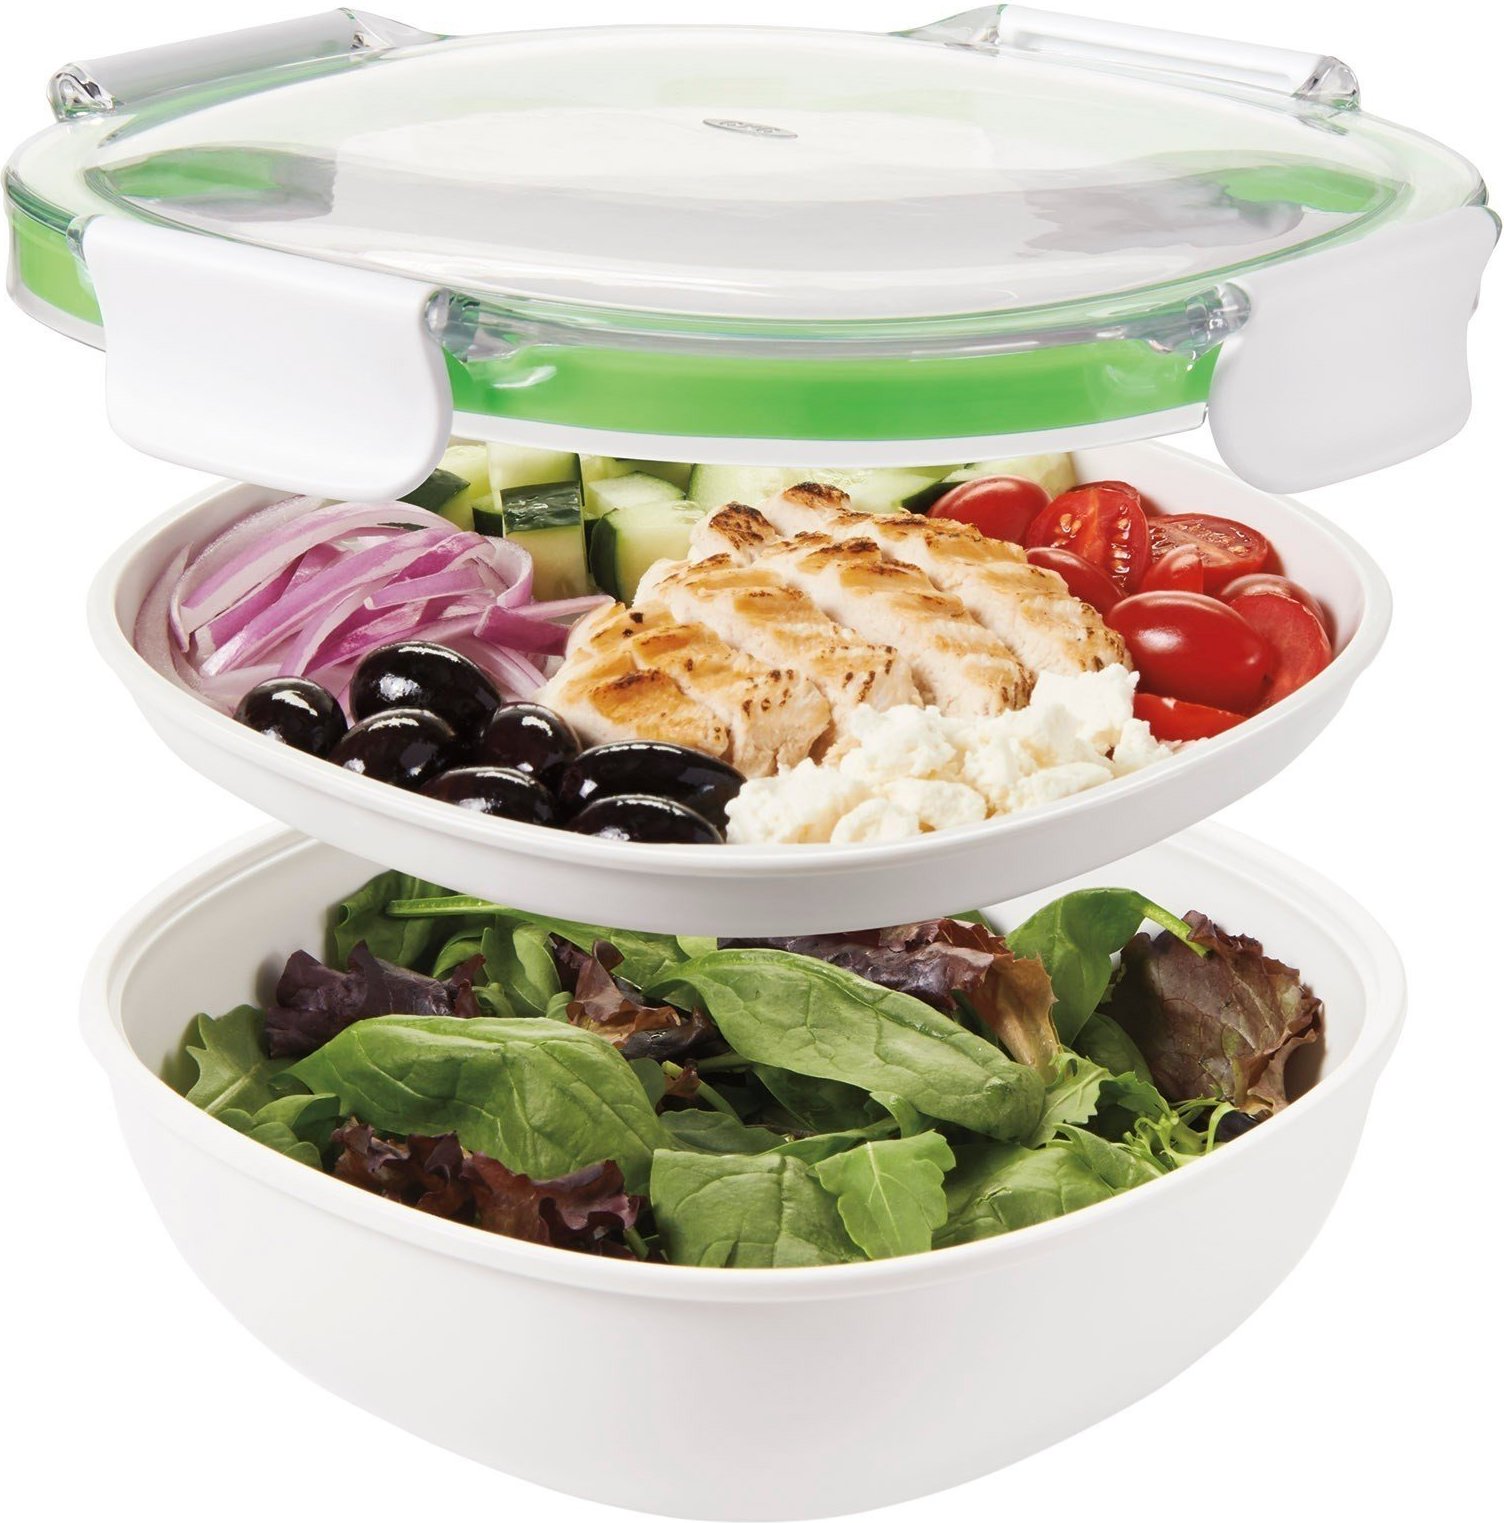 https://3fa-media.com/oxo/oxo-on-the-go-lunchbox-two-leveled-with-a-sauce-container__11139700MLNYK-2-s2500x2500.jpg